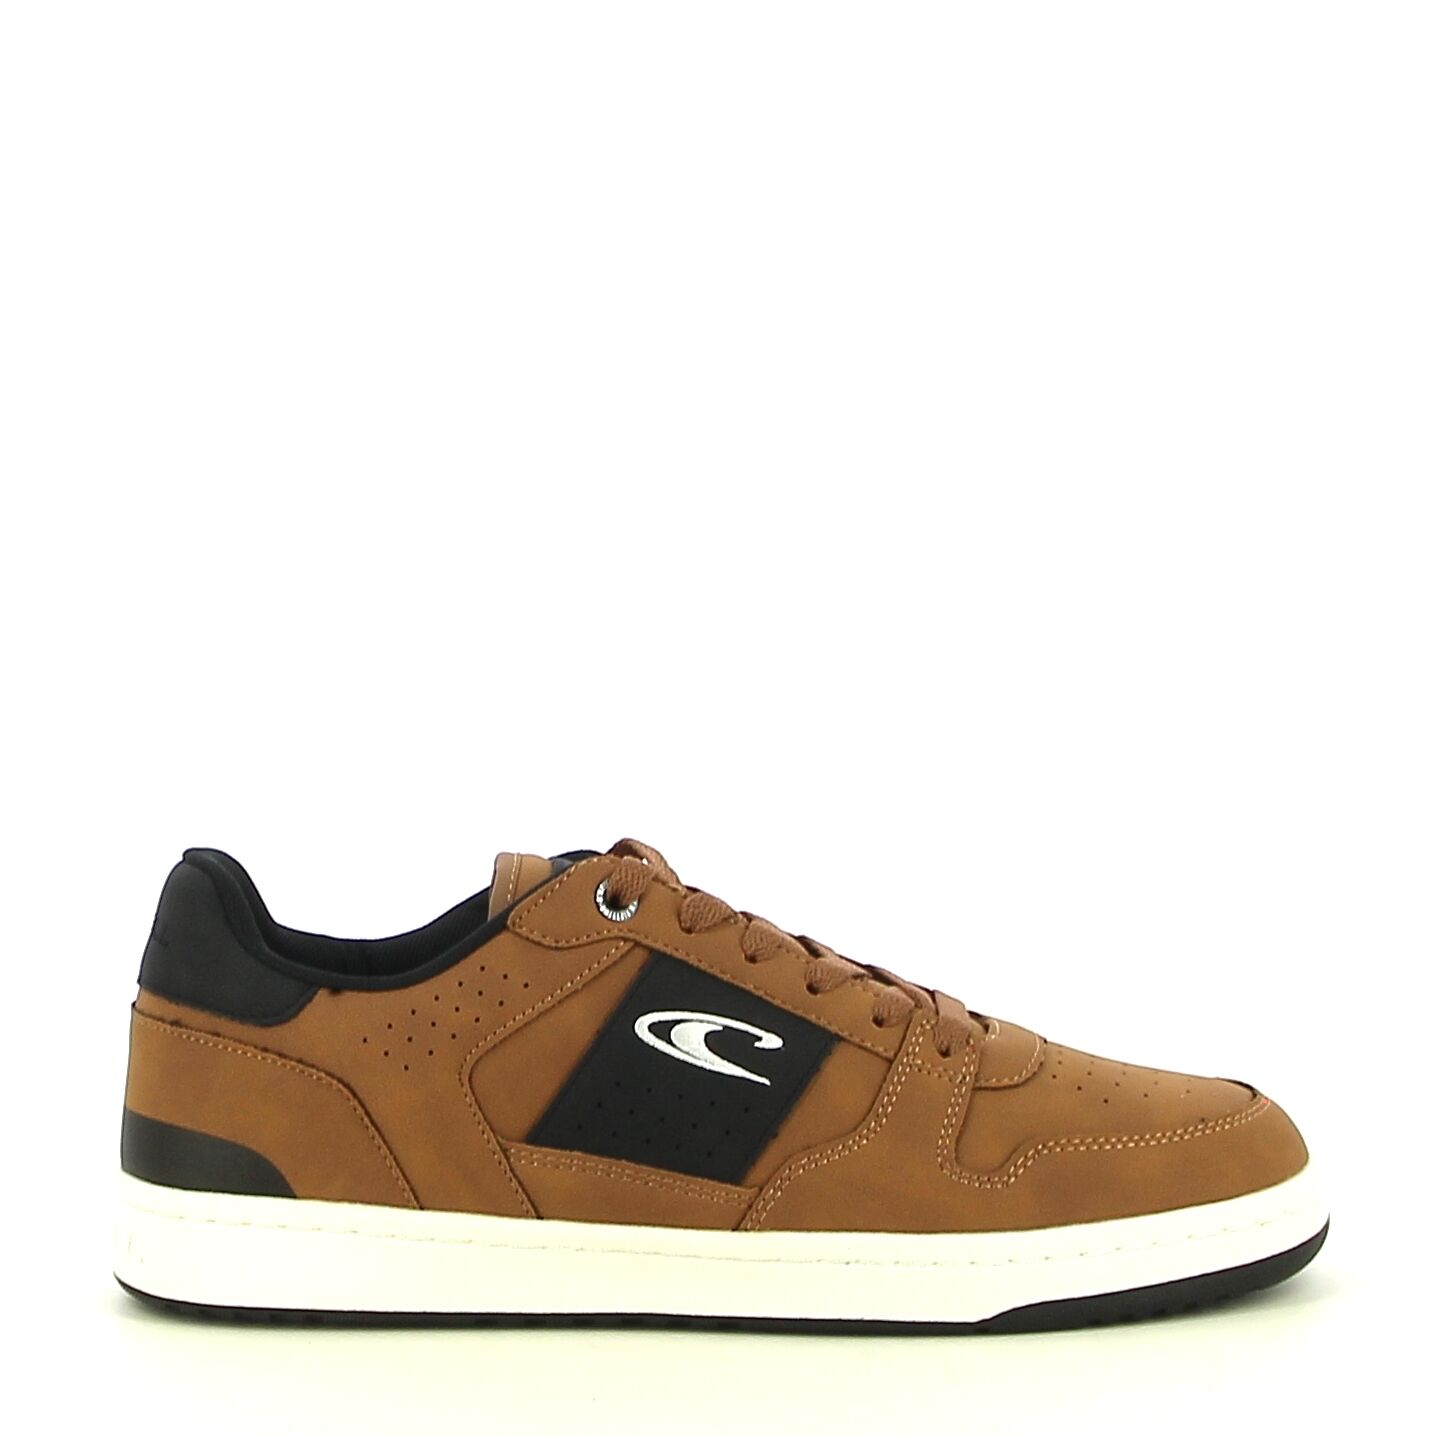 Champion - Camel - Sneakers